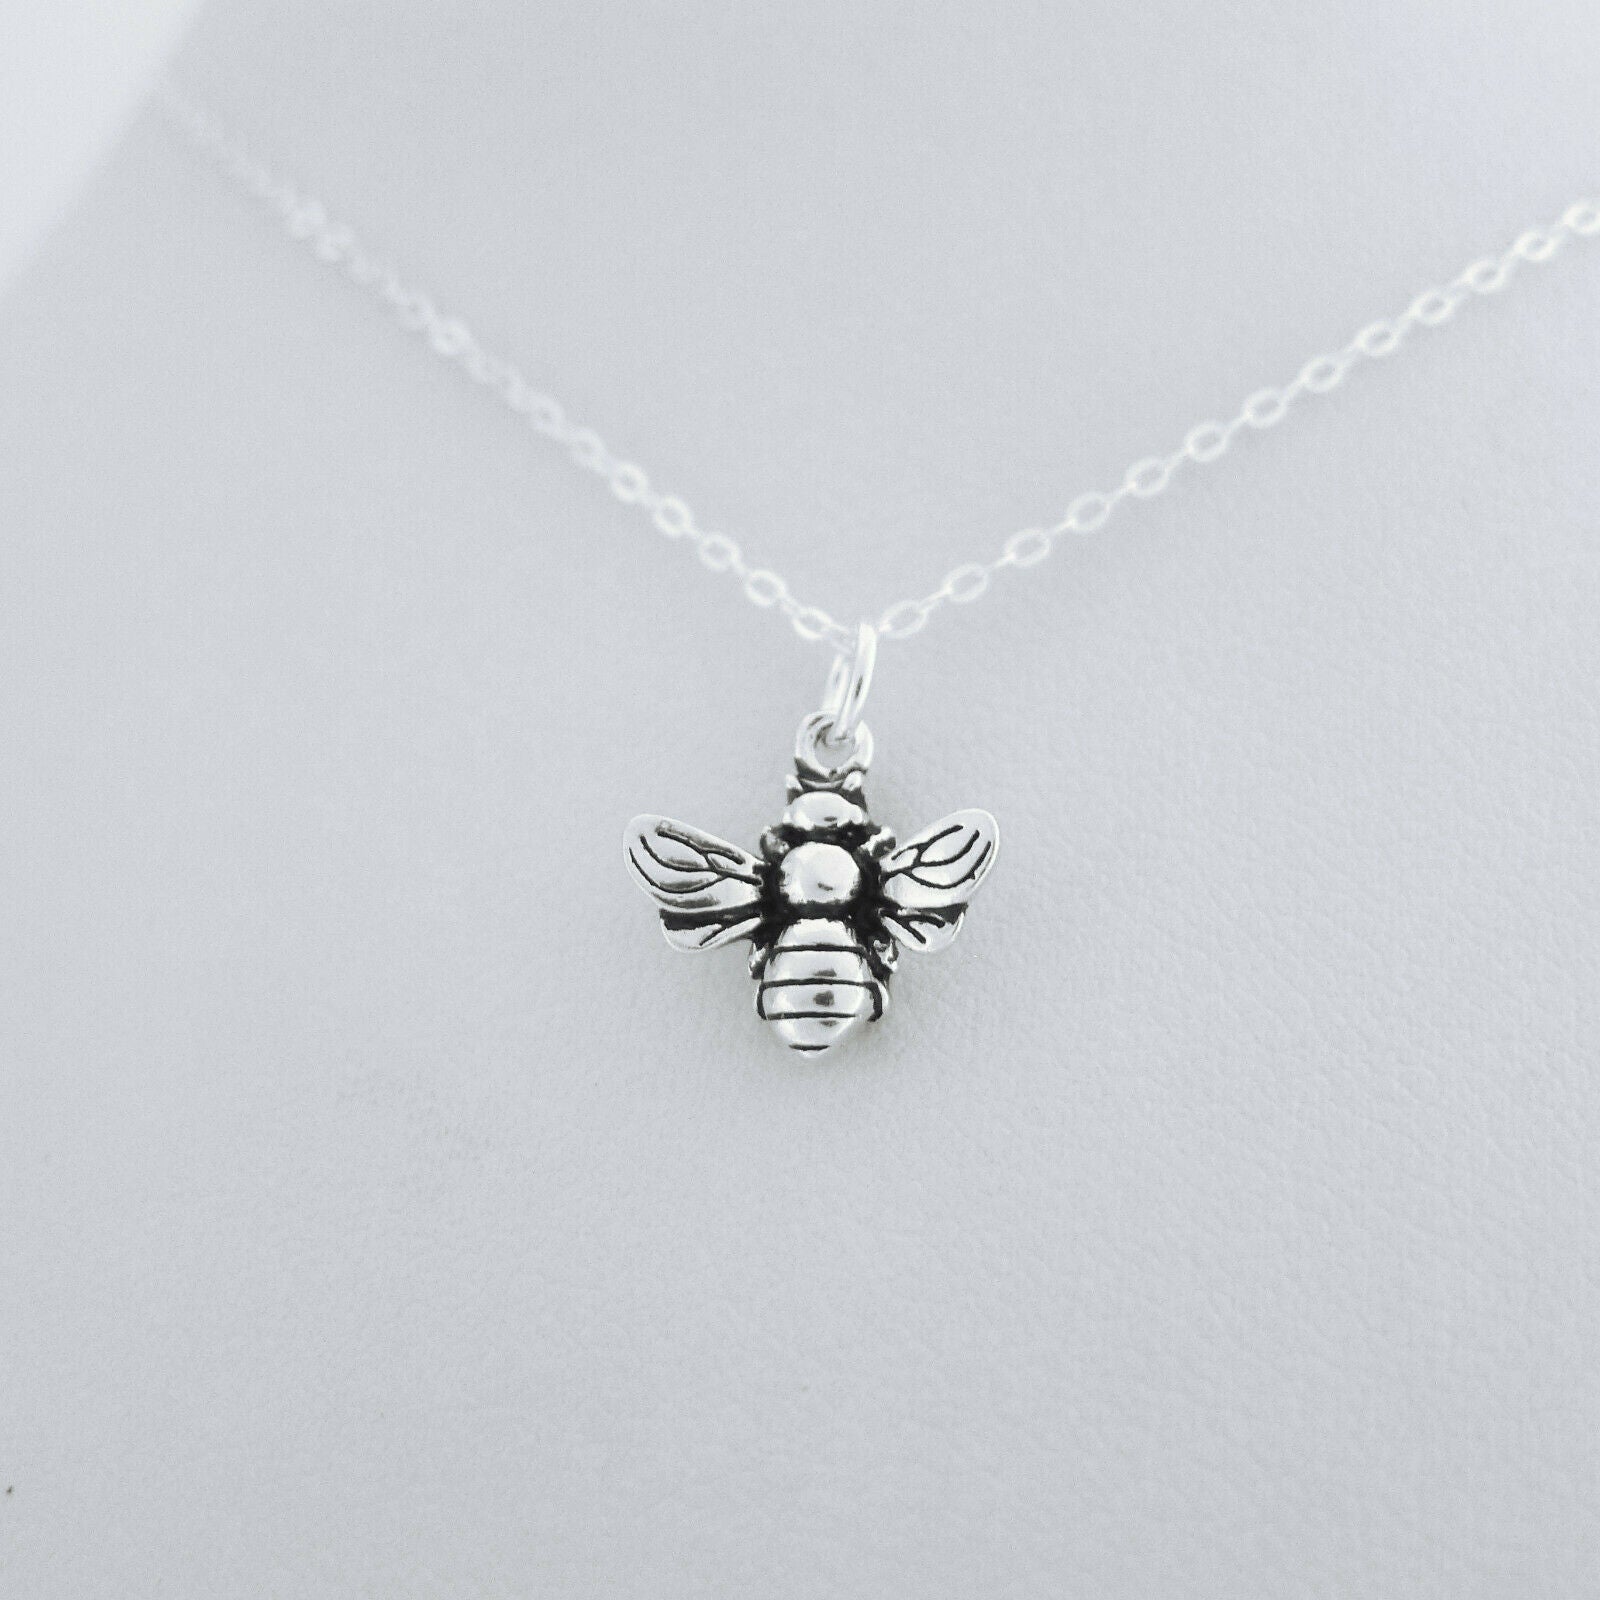 Sterling Silver 3D Bumble Bee Insect Necklace Bracelet Charm Pendant B - sugarkittenlondon